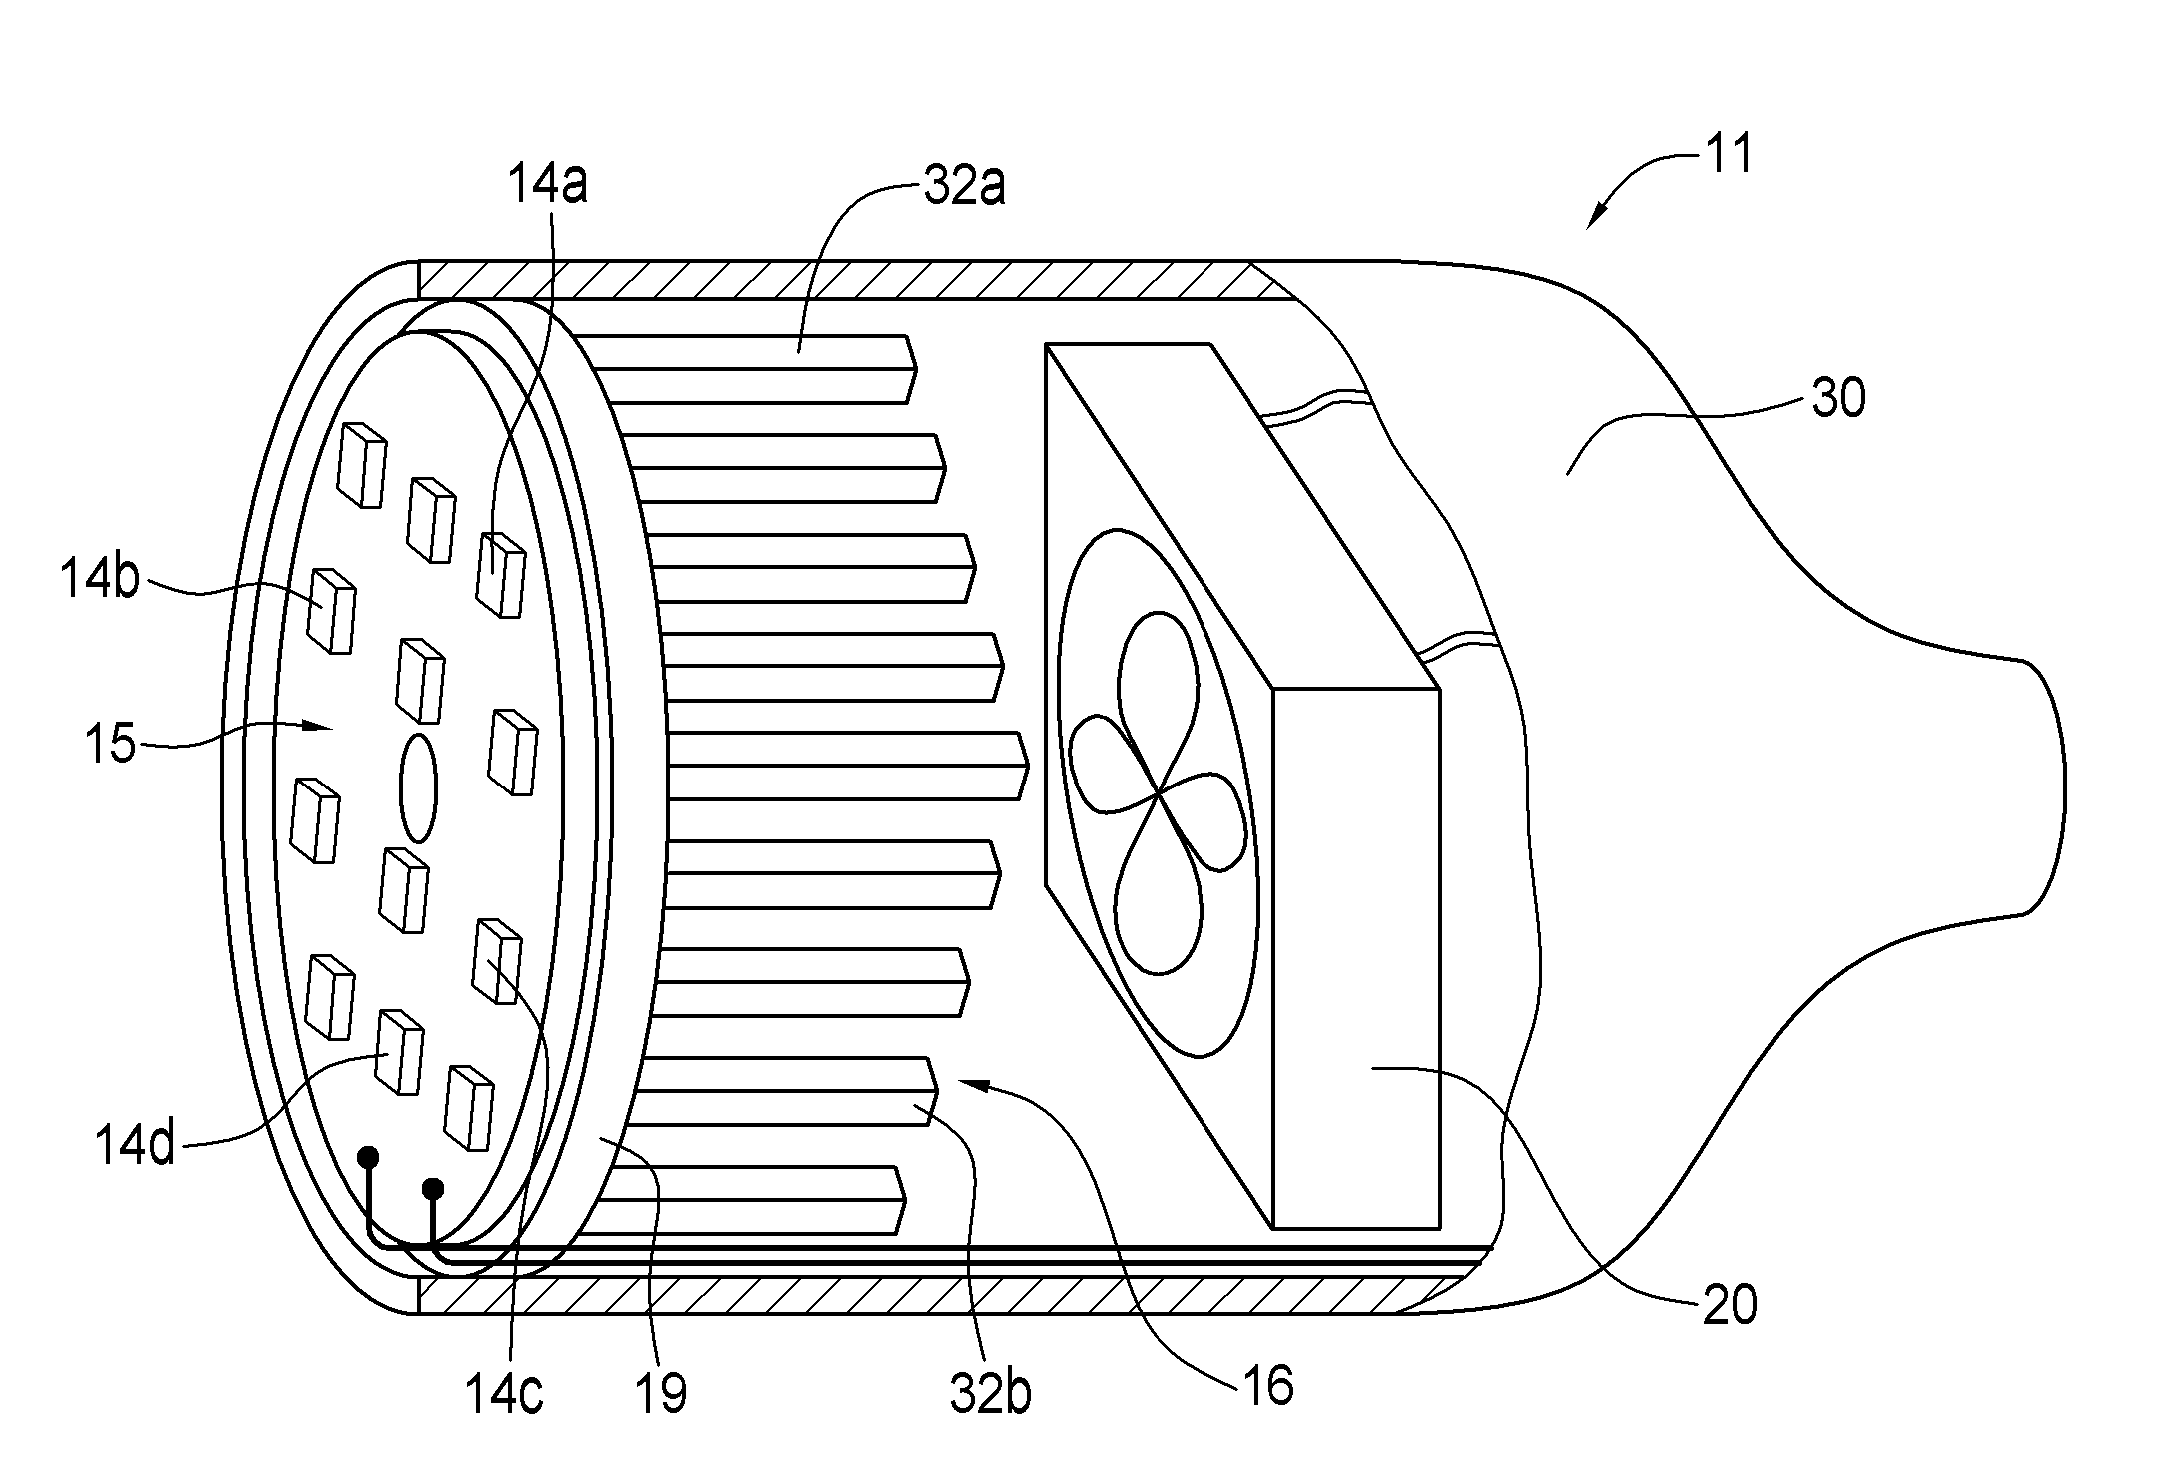 Thermal control system for a light-emitting diode fixture